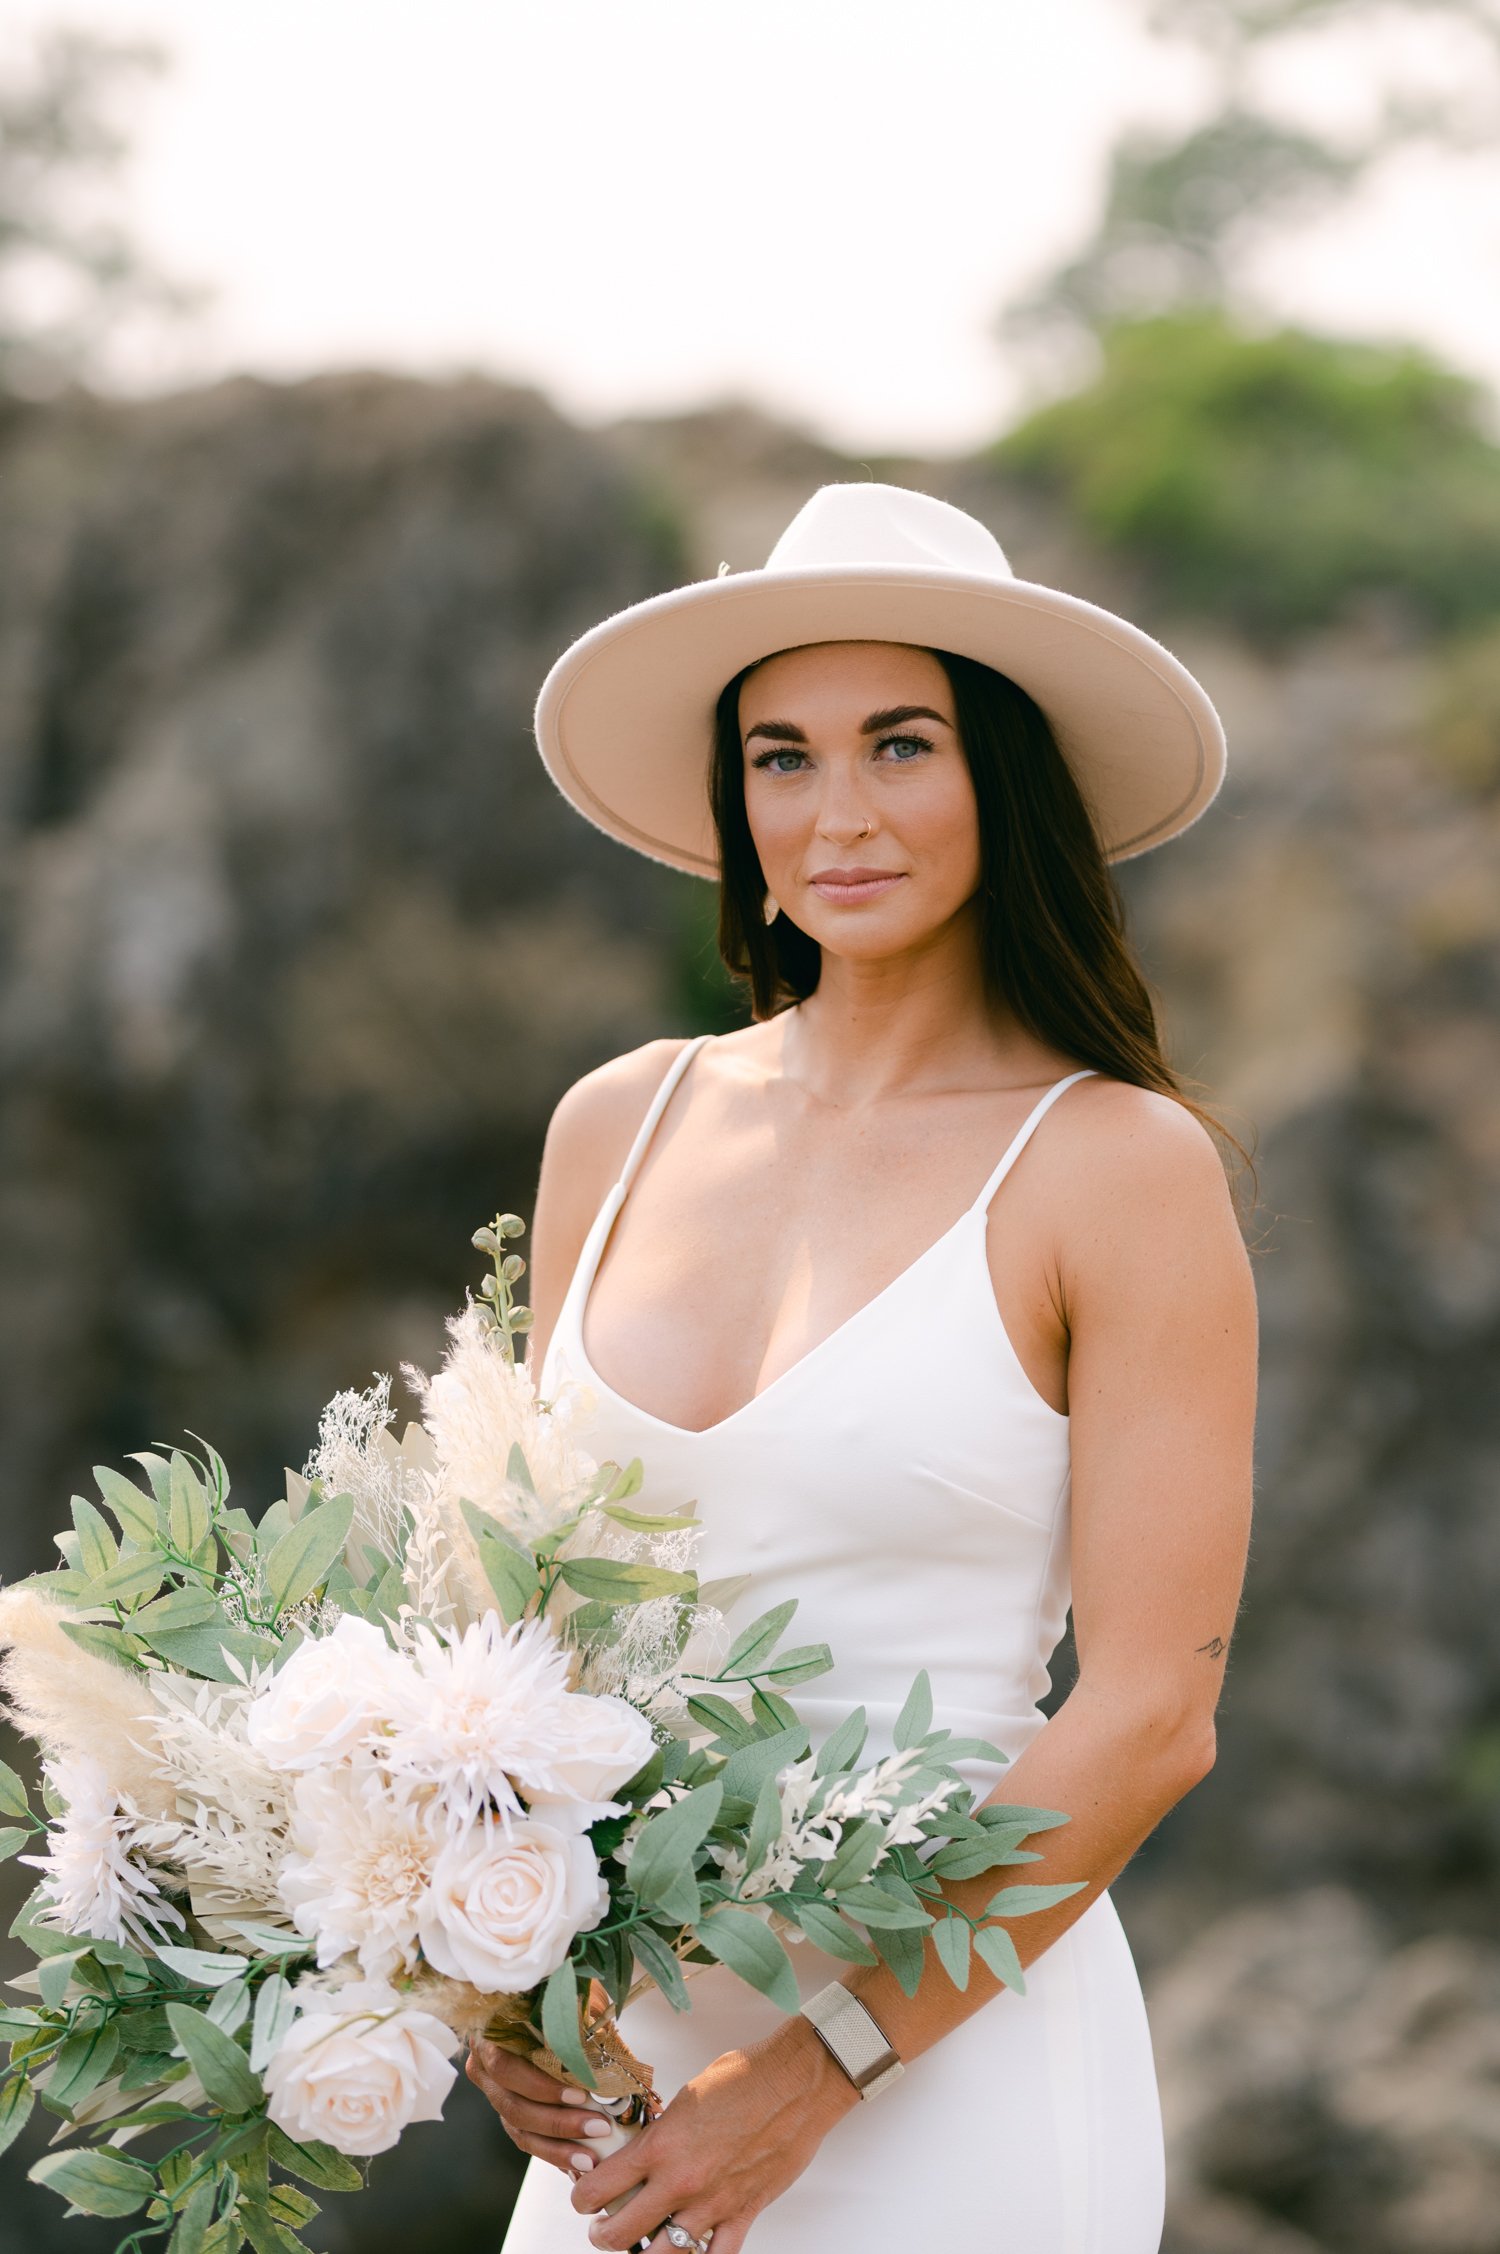 Lake Tahoe Yacht wedding, photo of bride wearing a fedora and a simple/classic white dress